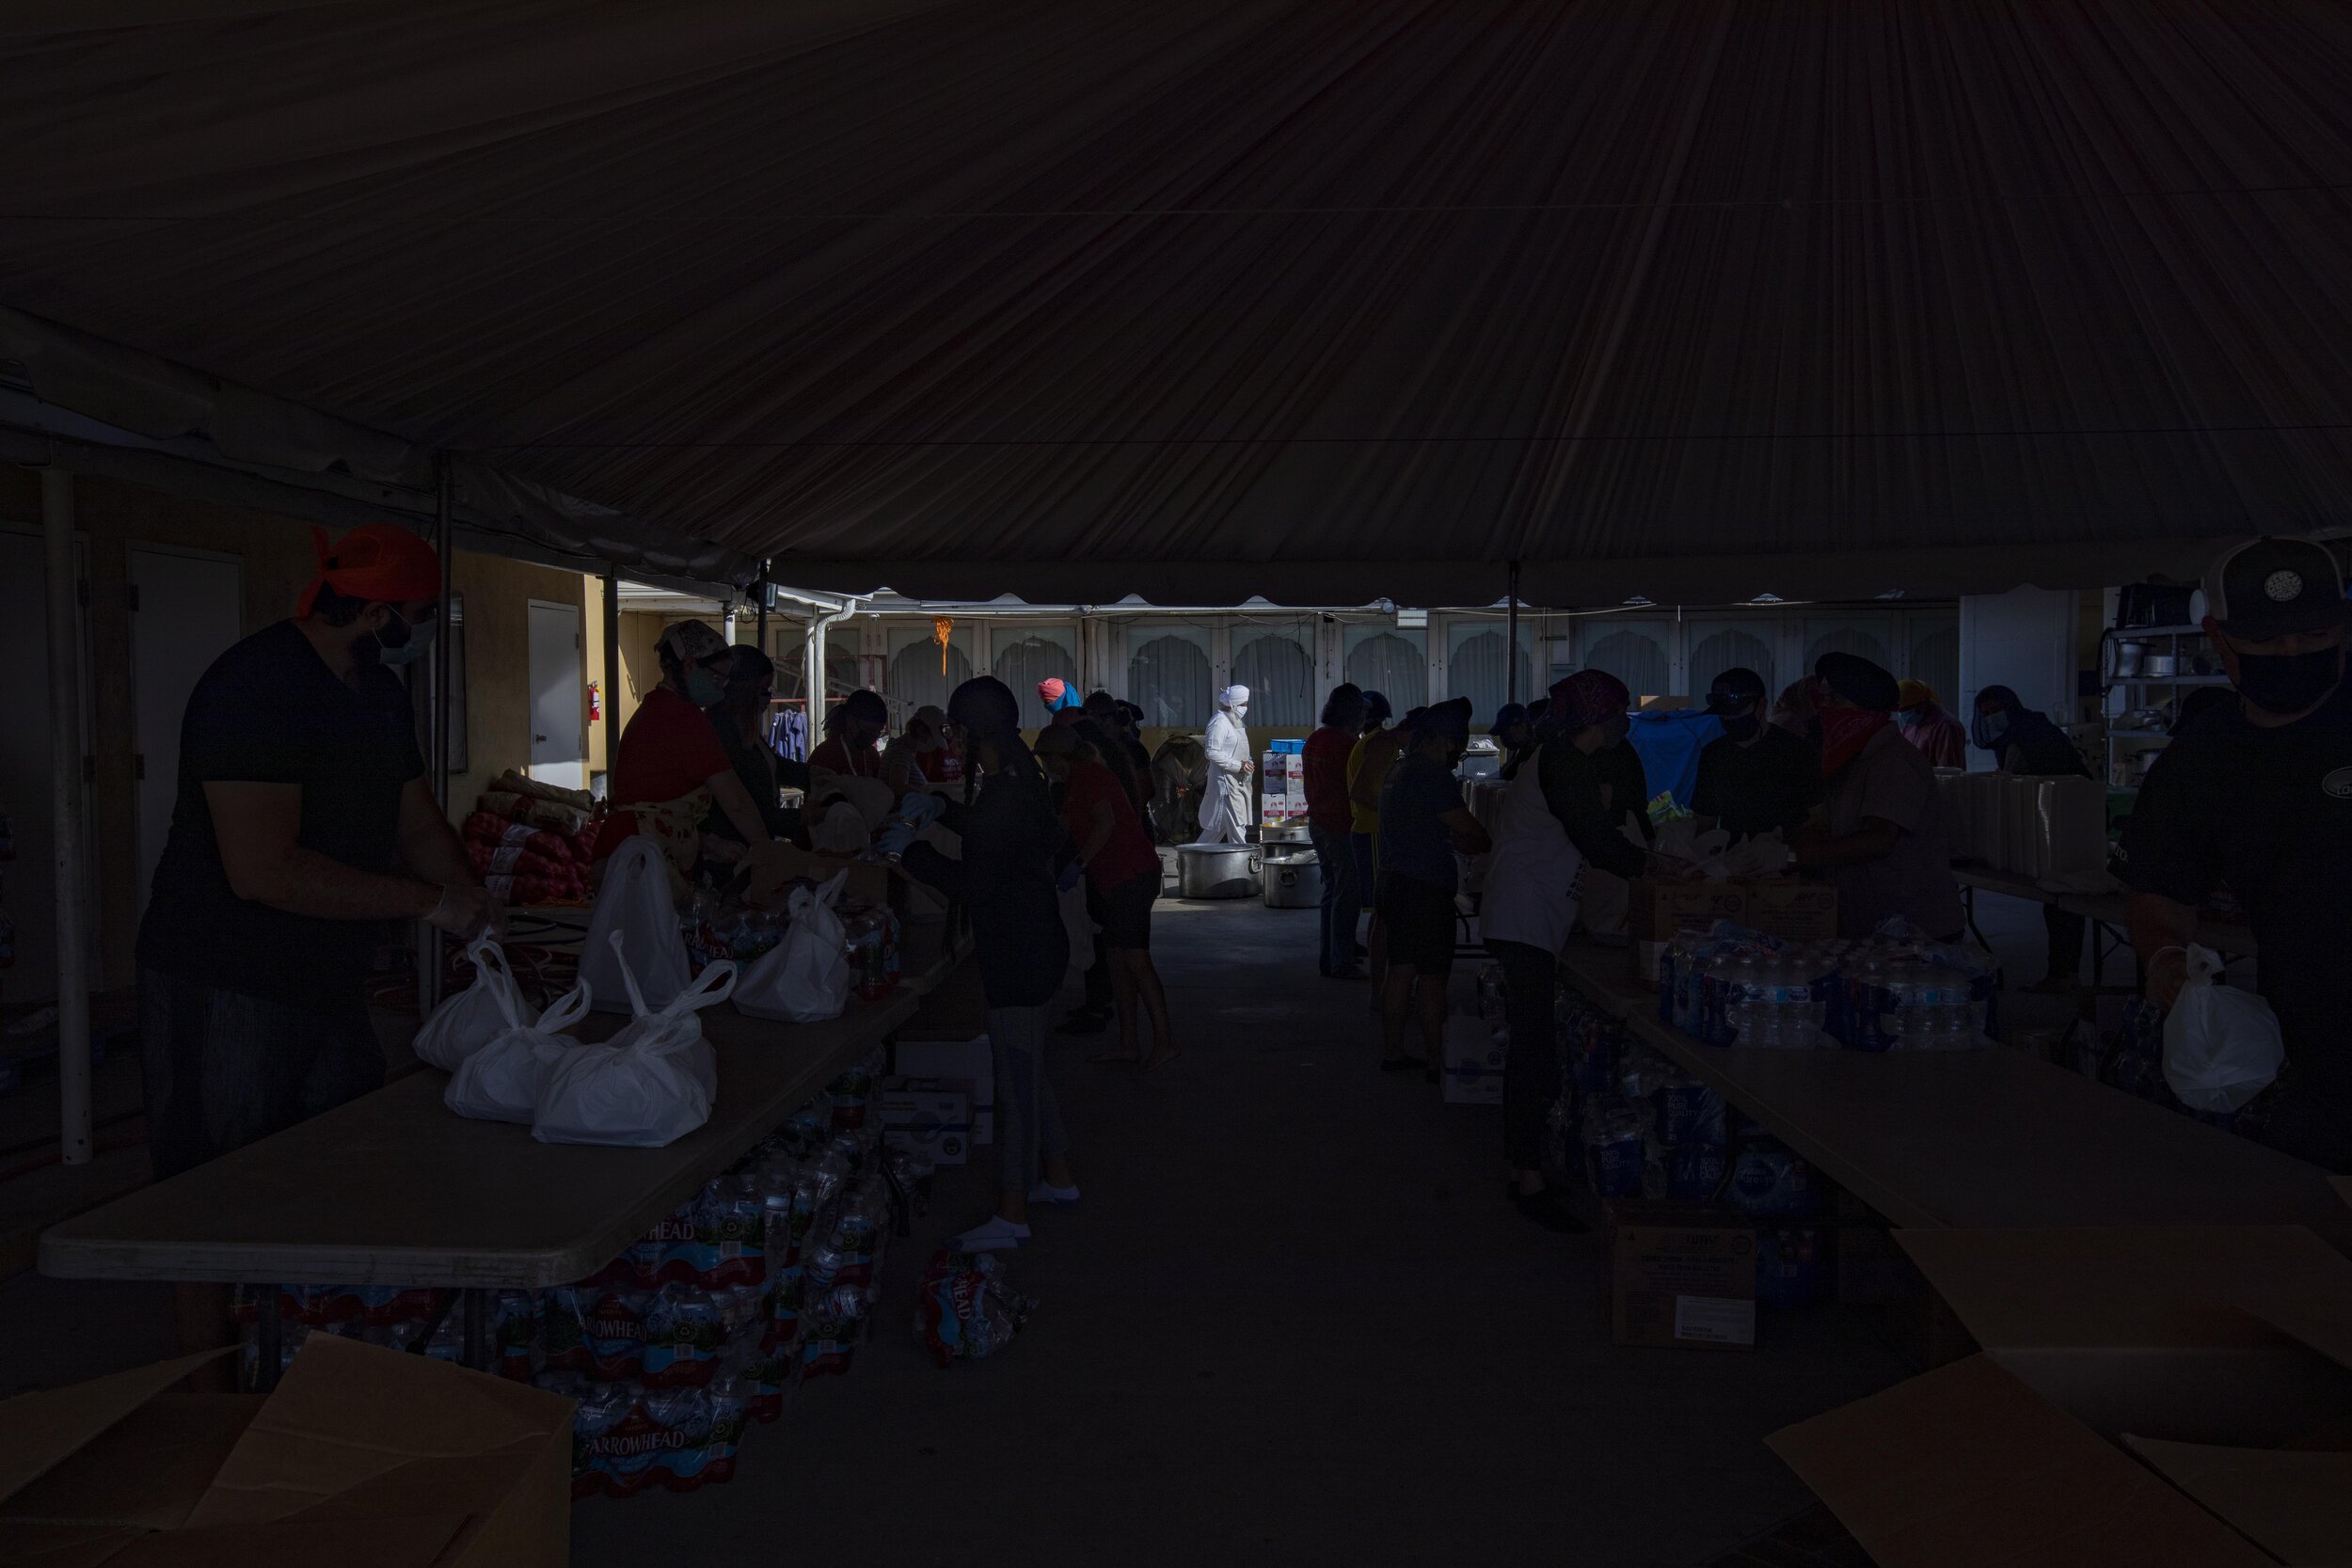  Manjeet Singh walks by the tent where volunteers are packaging 3,000 meals to be distributed to people with disabilities and others in need at Khalsa Care Foundation. They have 50-55 volunteers that show up Monday through Friday to make and package 